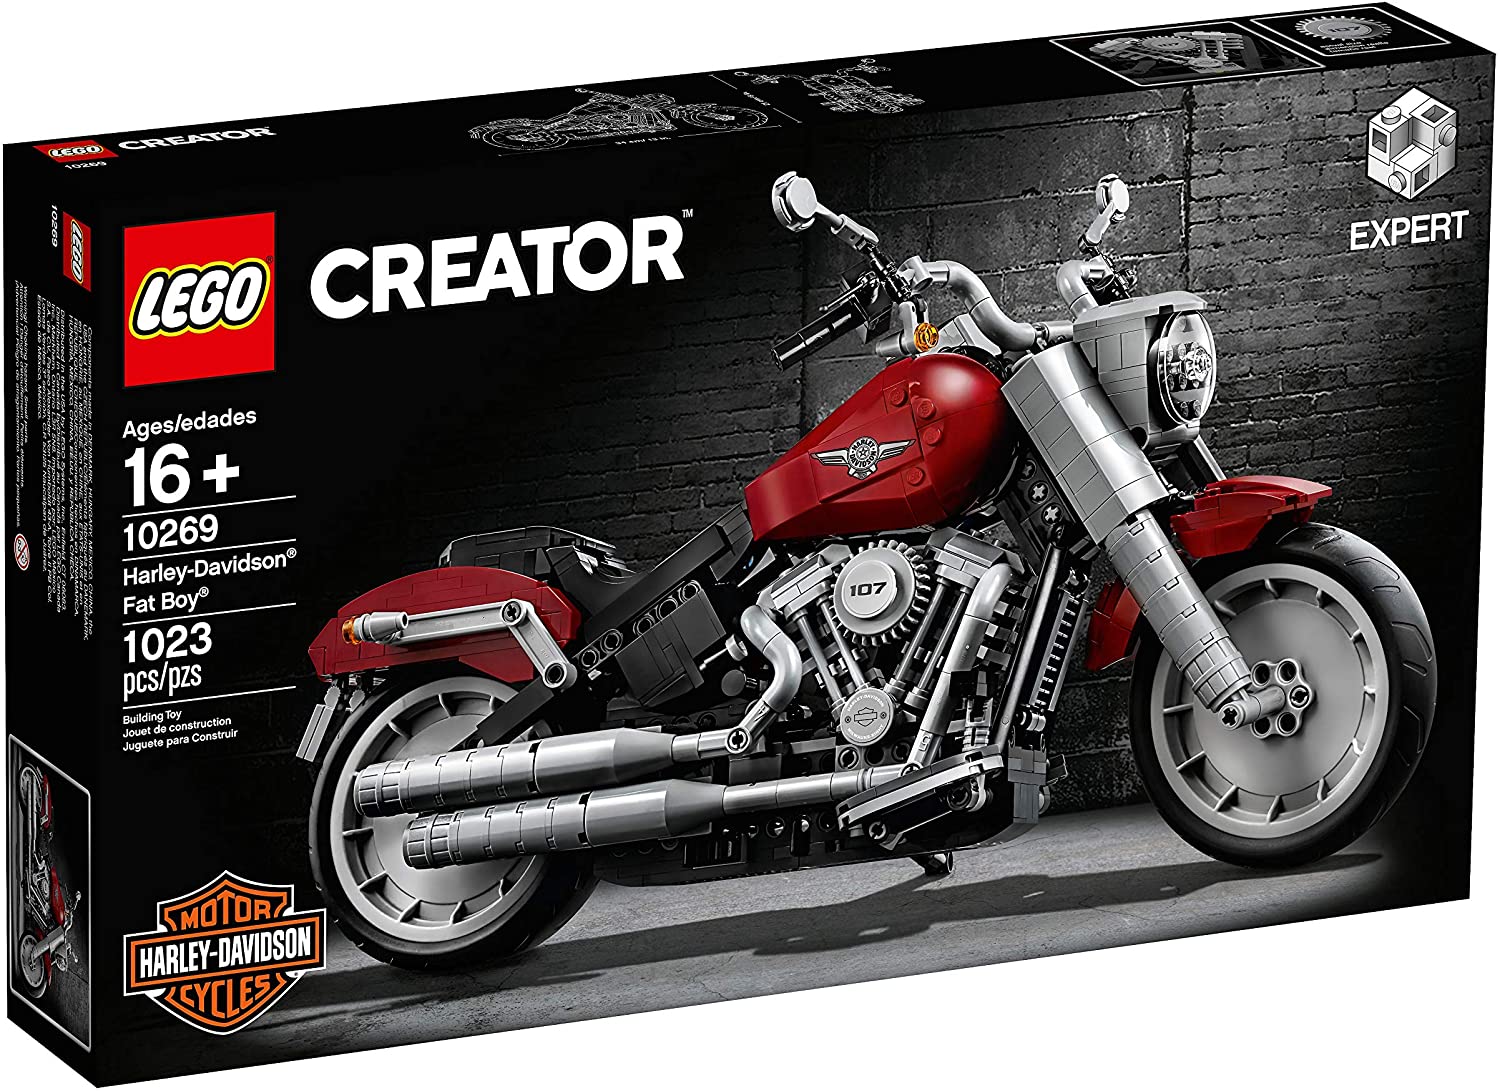 7 Best LEGO Motorcycle Sets 2023 - Buying Guide & Reviews 3